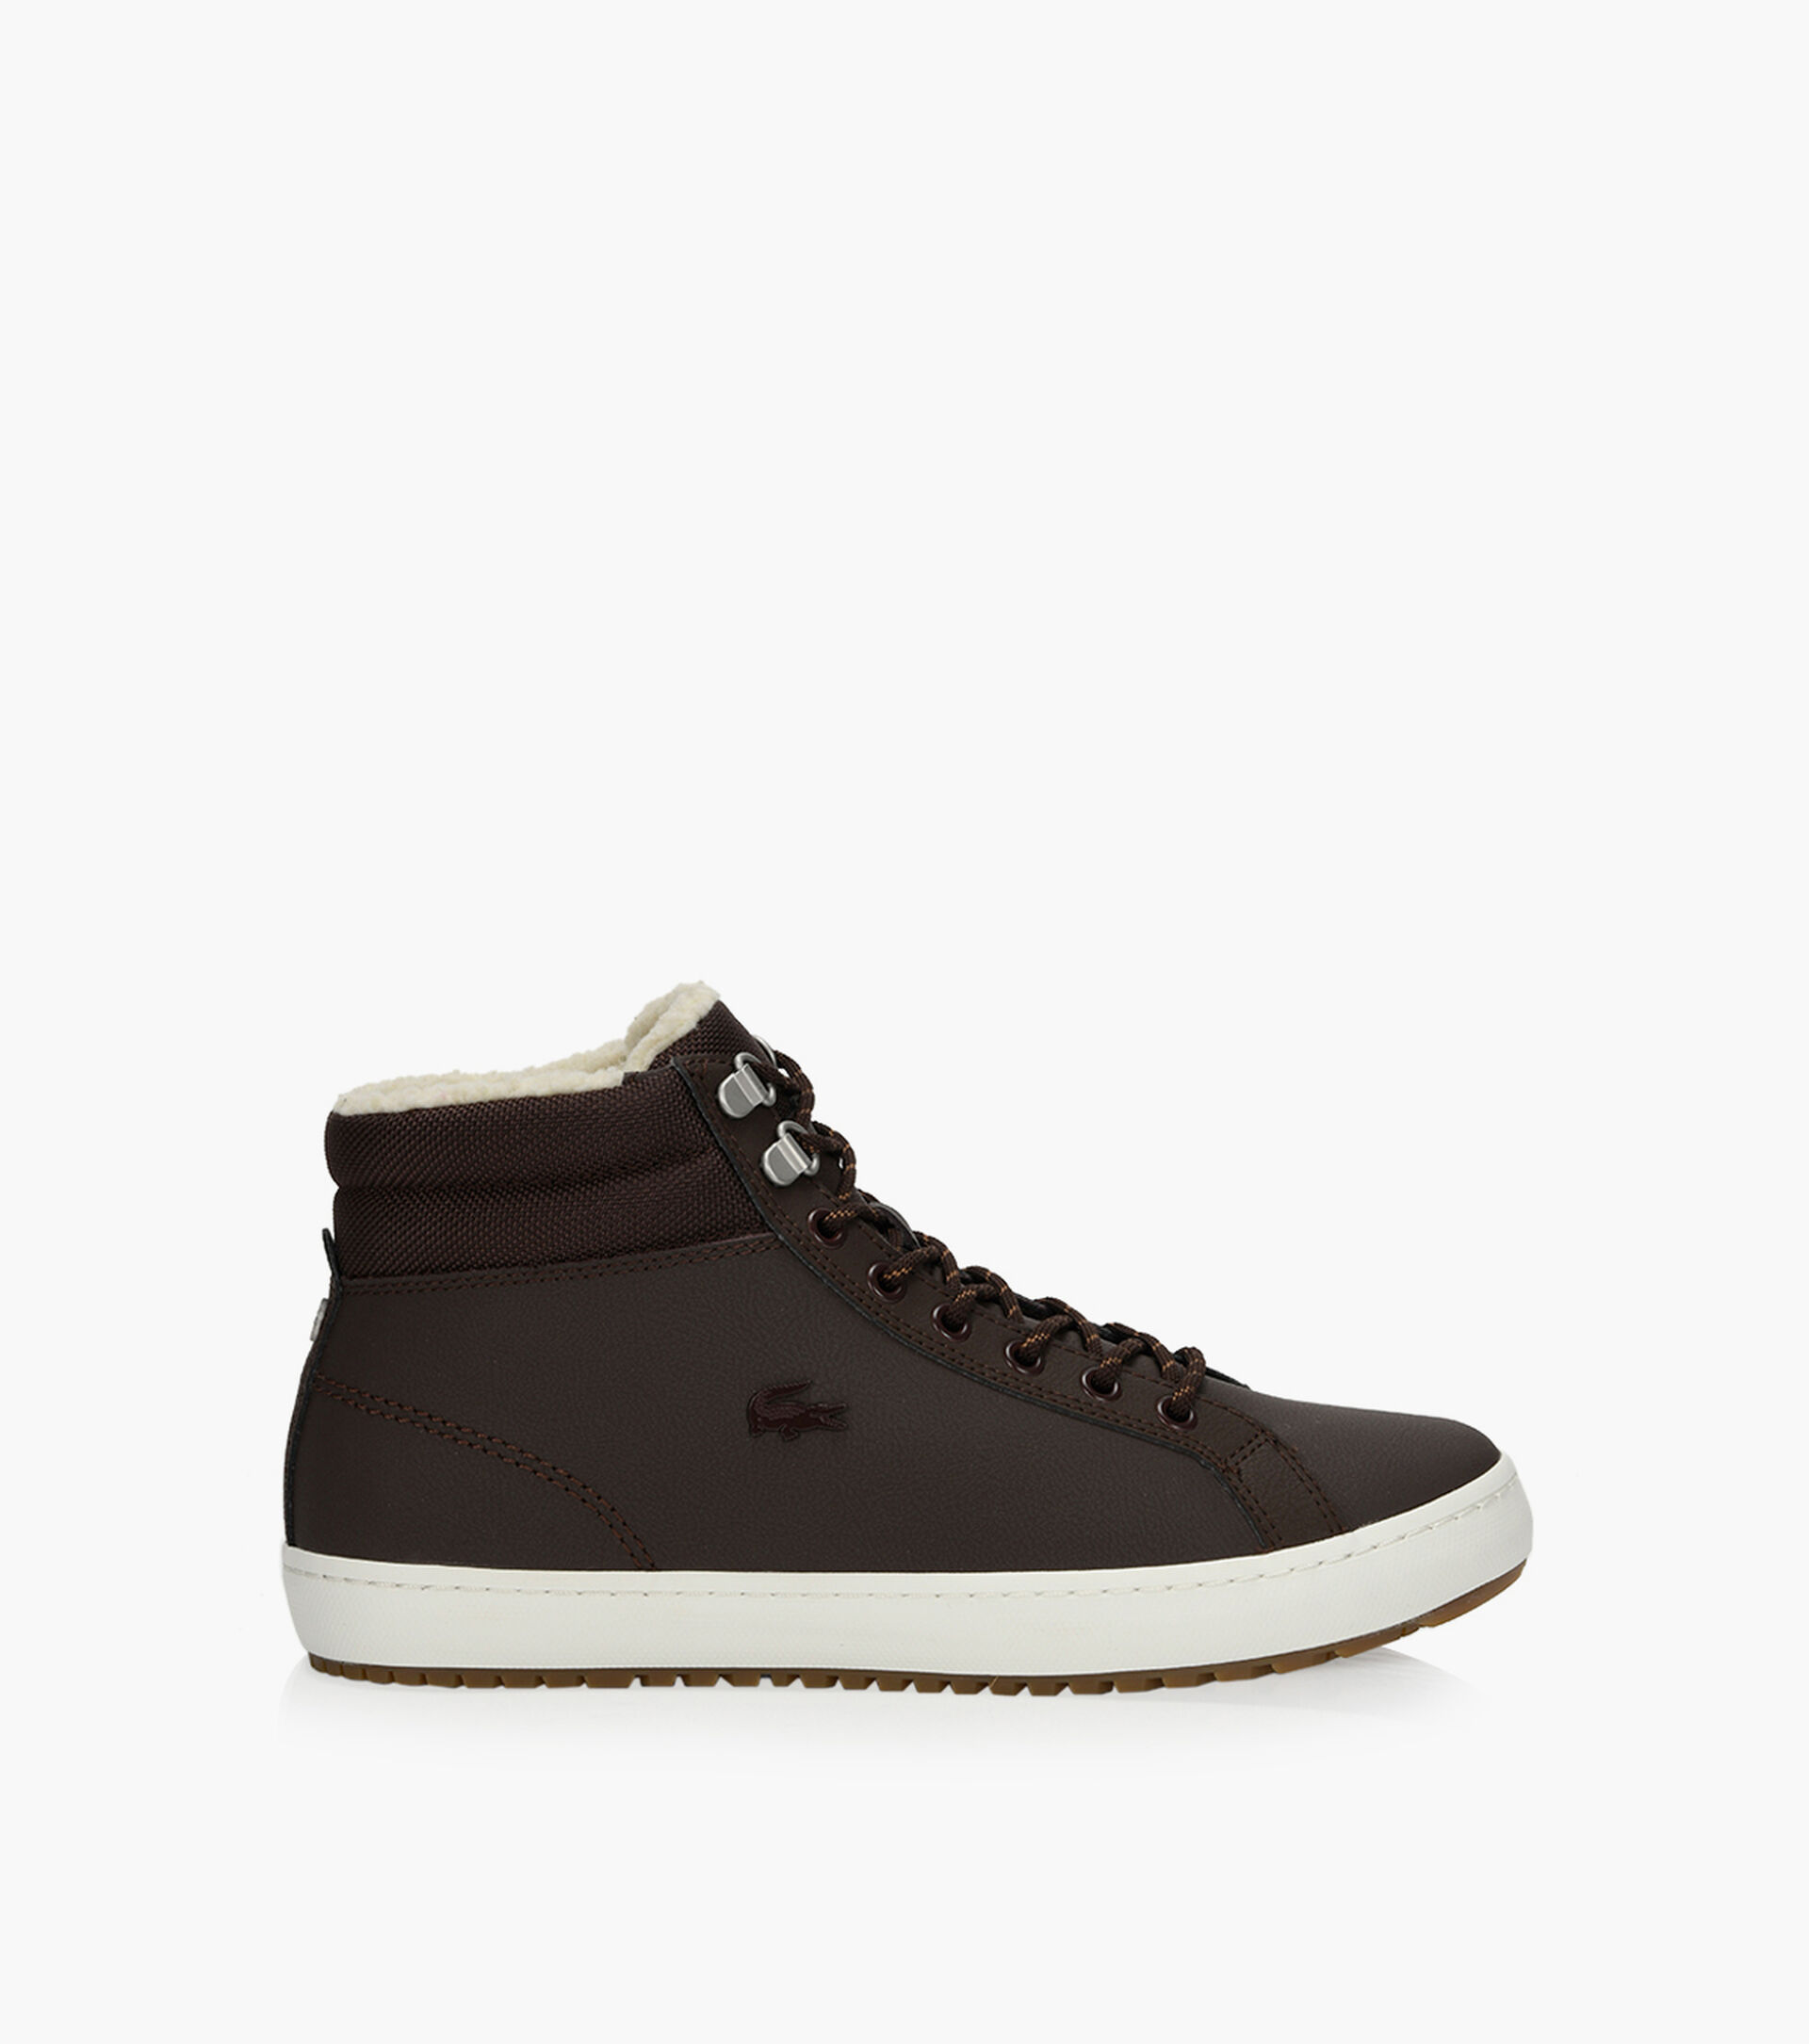 LACOSTE STRAIGHTSET THERMO 419-2 - Brown Leather | Browns Shoes